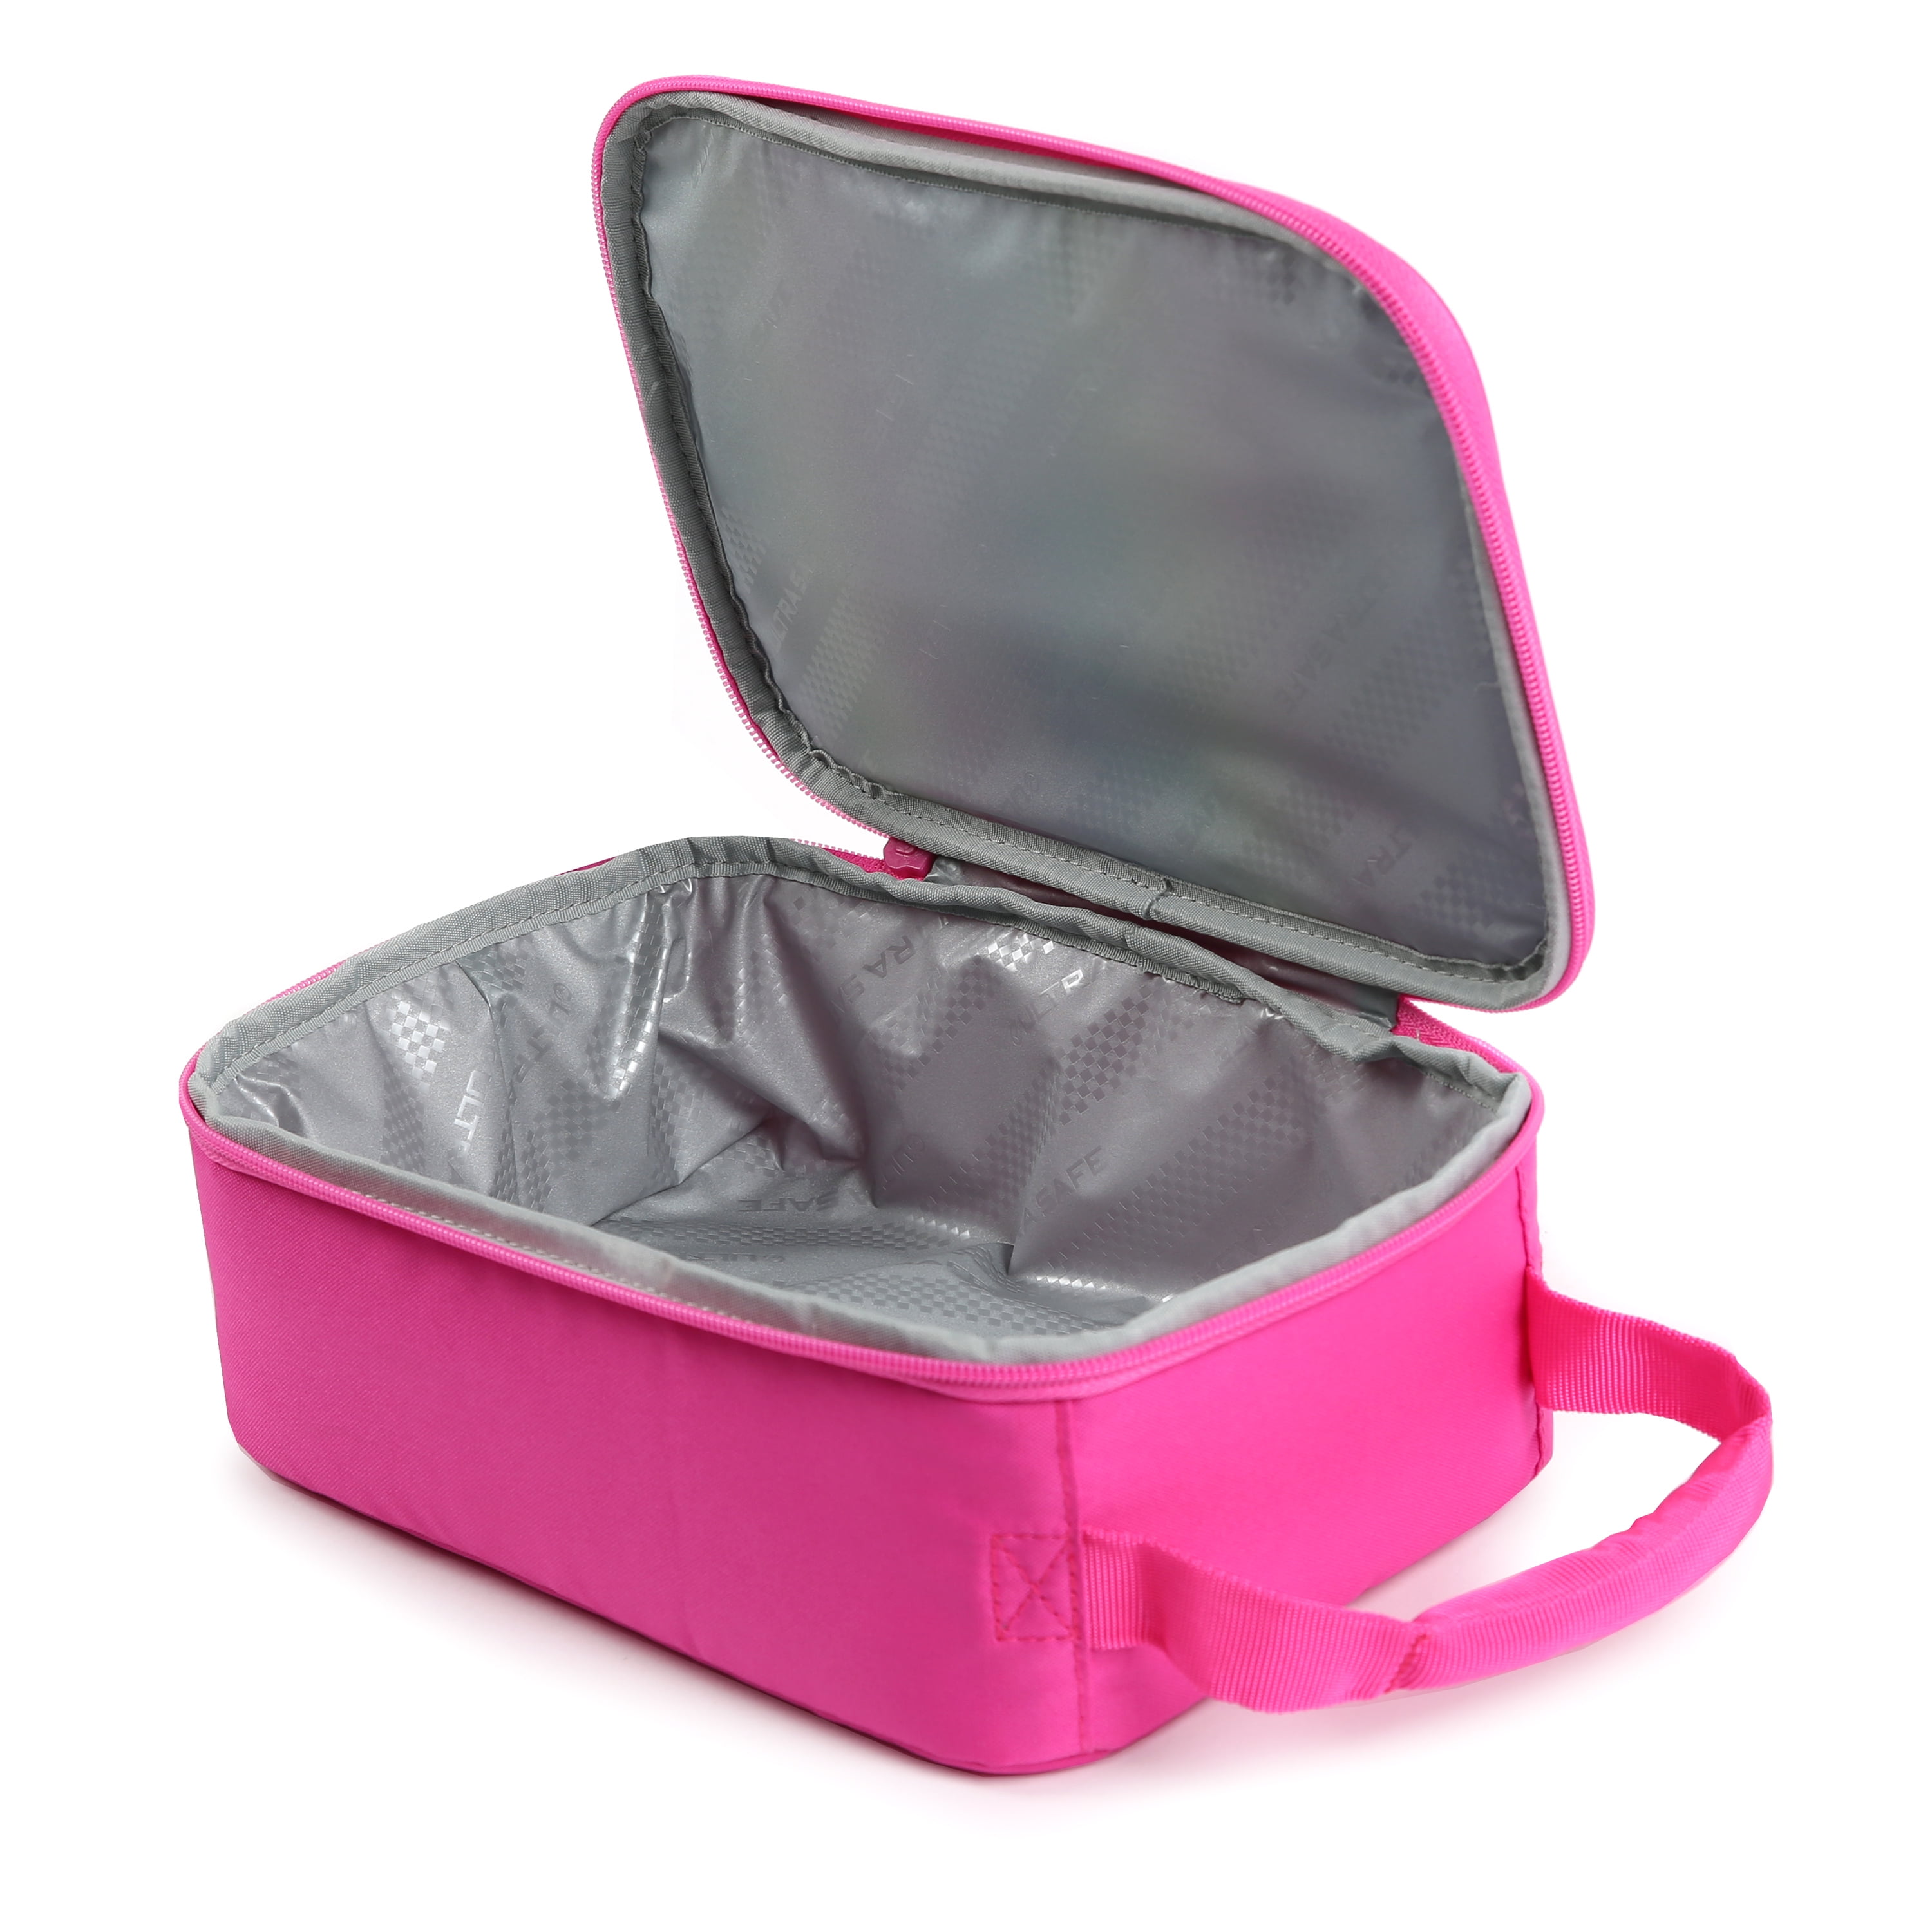 Arctic Zone Upright Lunch Box with Thermal Insulation, Mermaid 